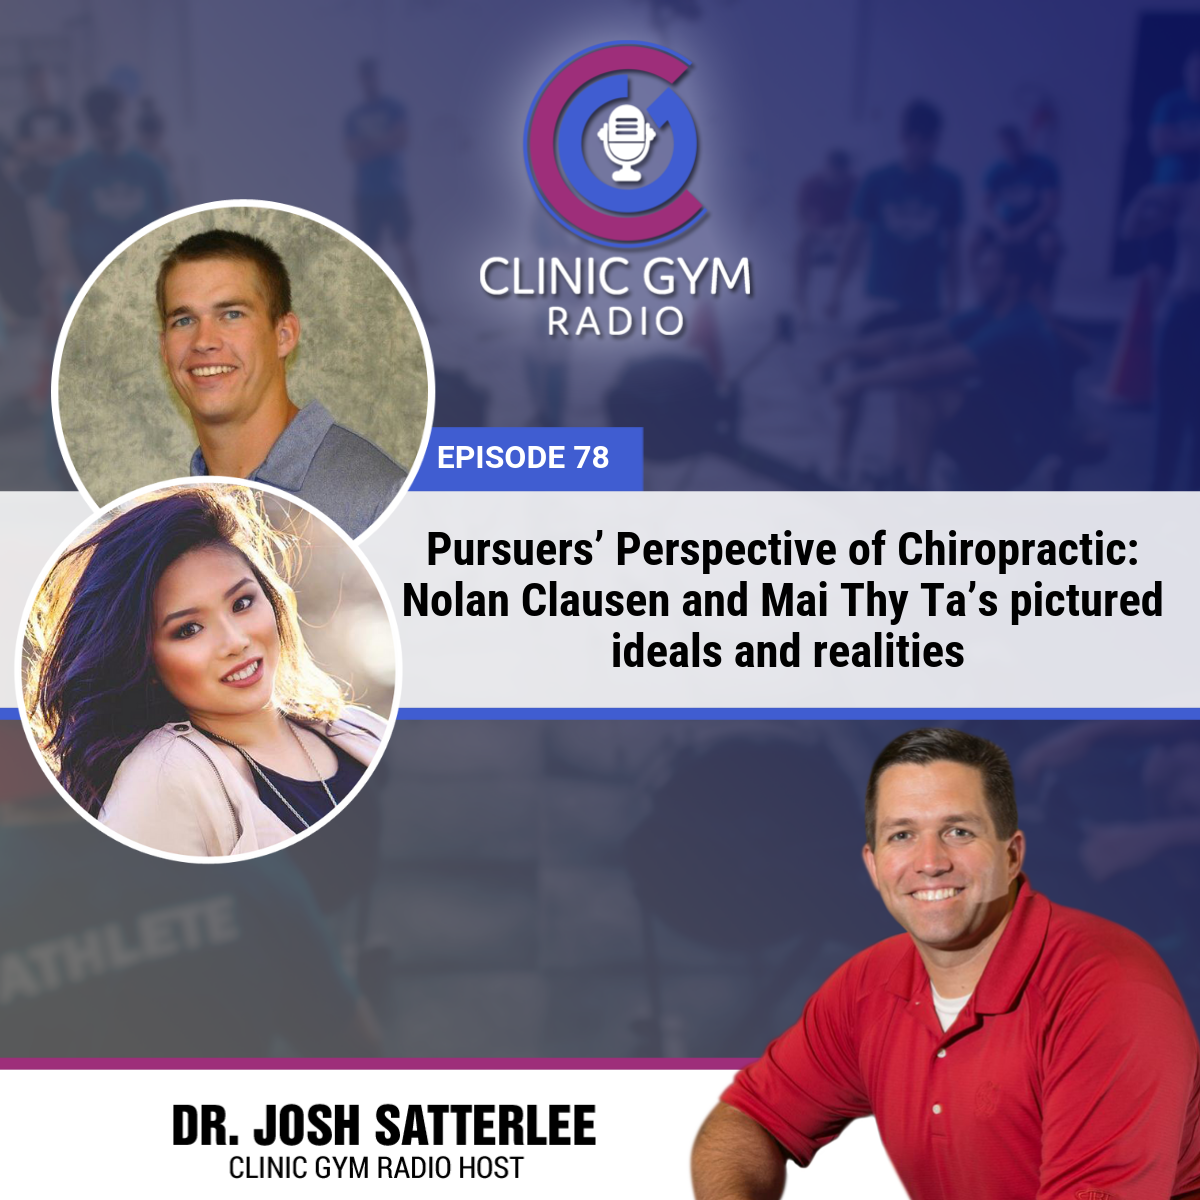 Pursuers’ Perspective of Chiropractic: Nolan Clausen and Mai Thy Ta’s pictured ideals and realities